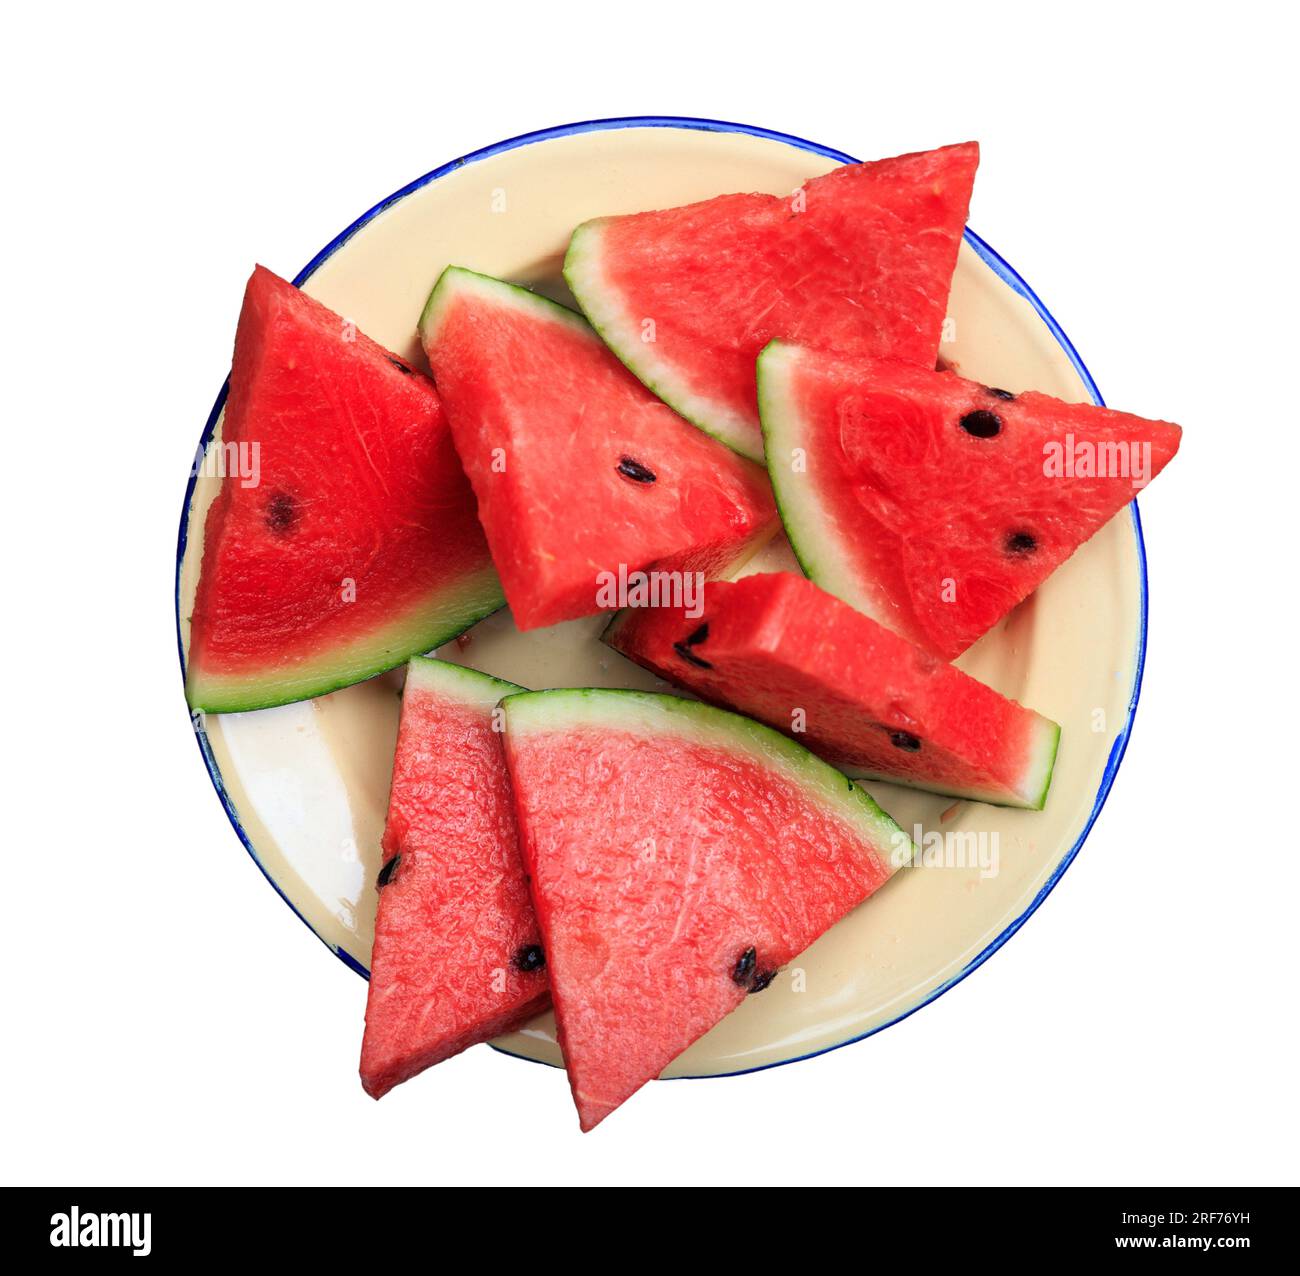 Watermelon pieces served in a plate isolated on white background, top view Stock Photo